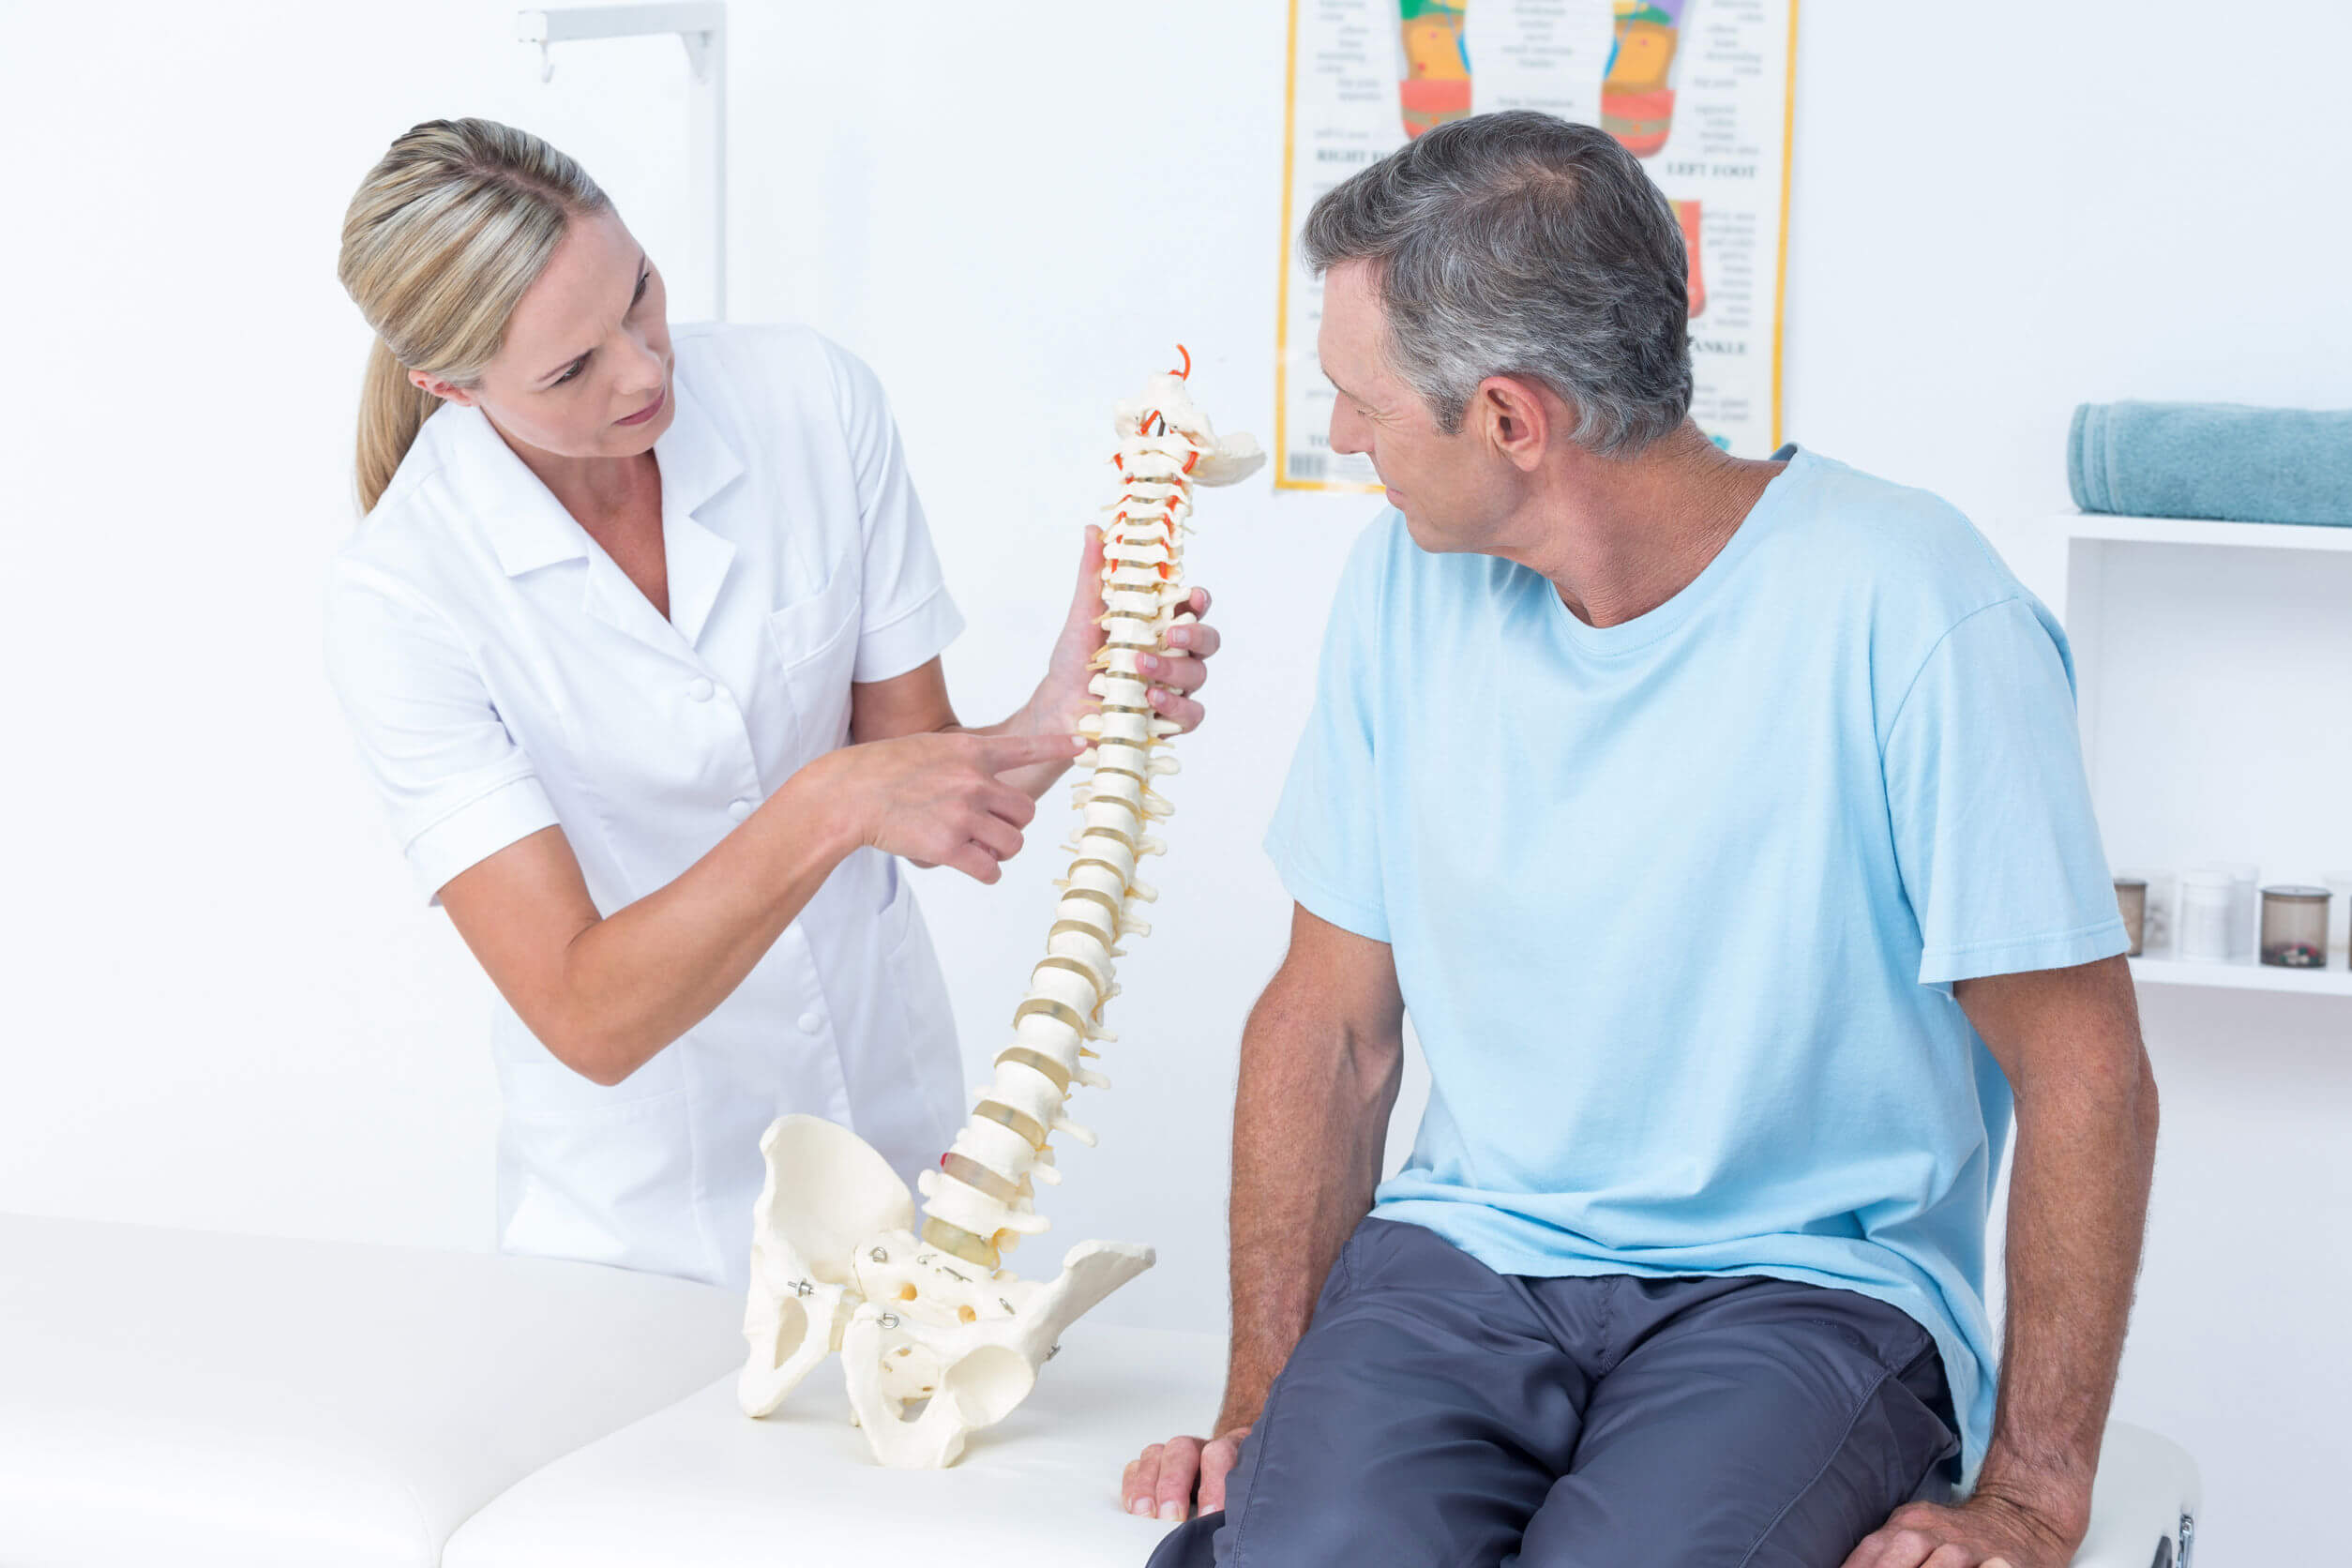 The Just Few Common Myths & Misconceptions About Chiropractic Update 2019 in Australia